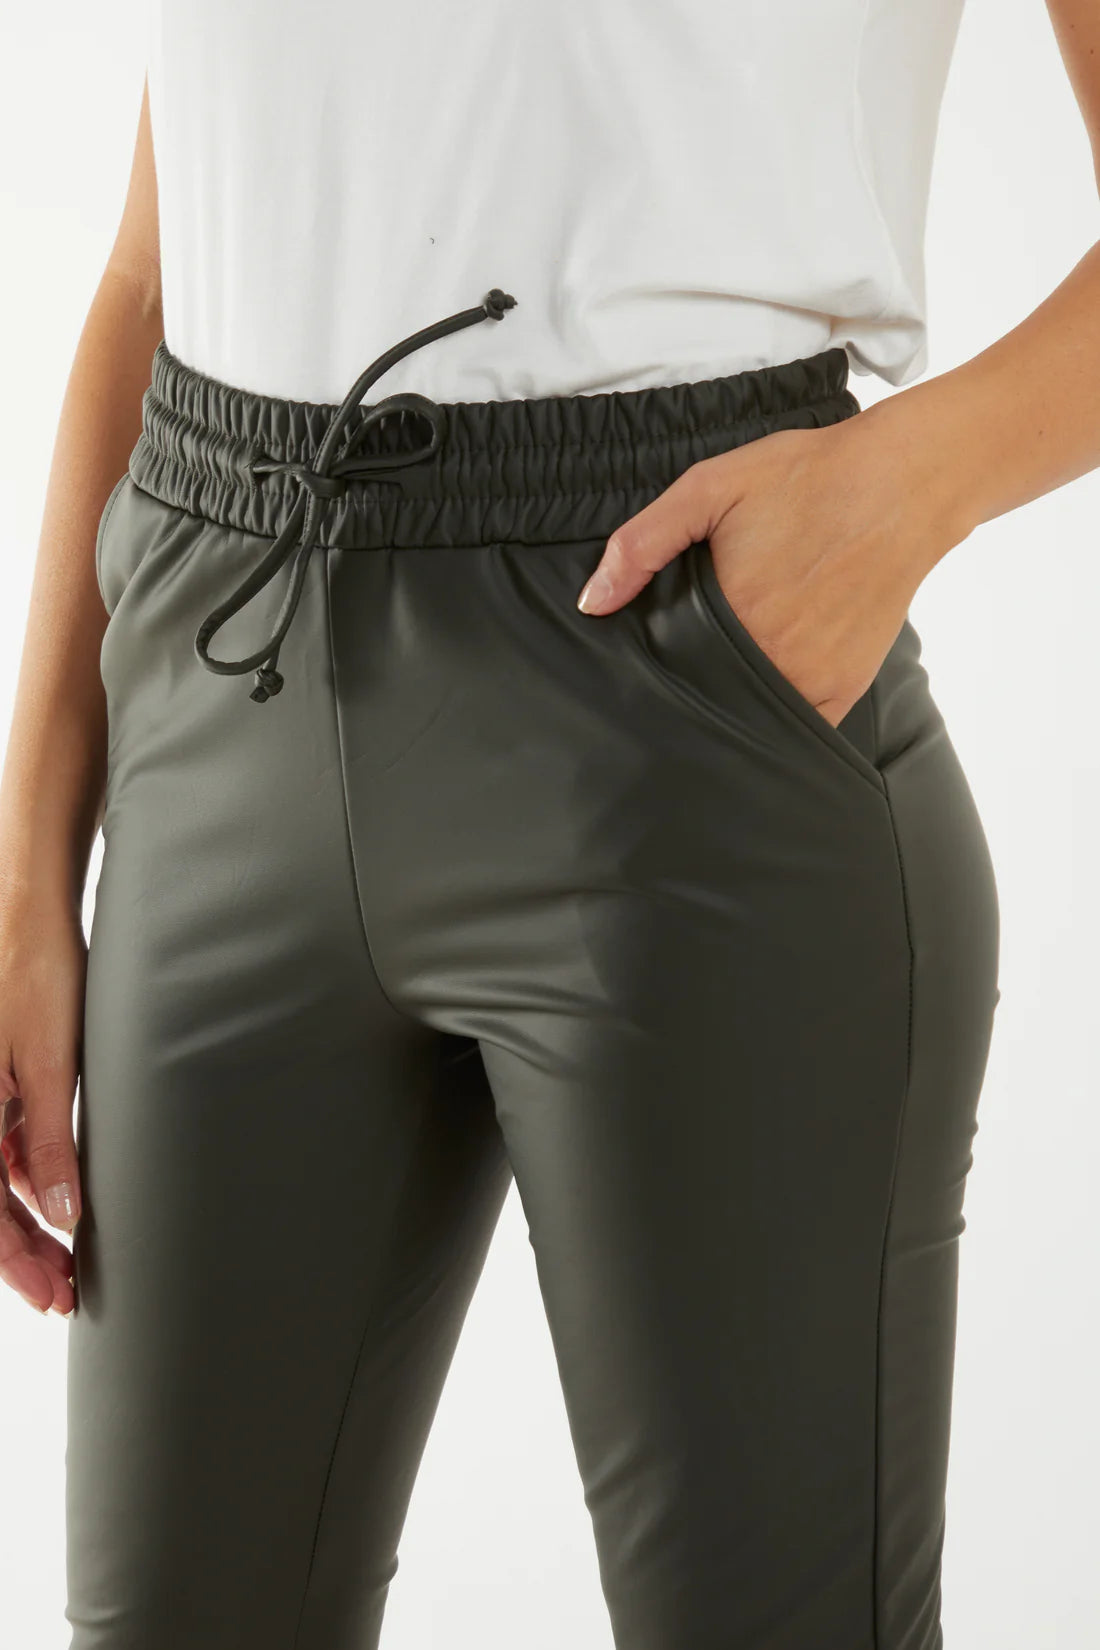 “Lilly” Leather Look Trouser